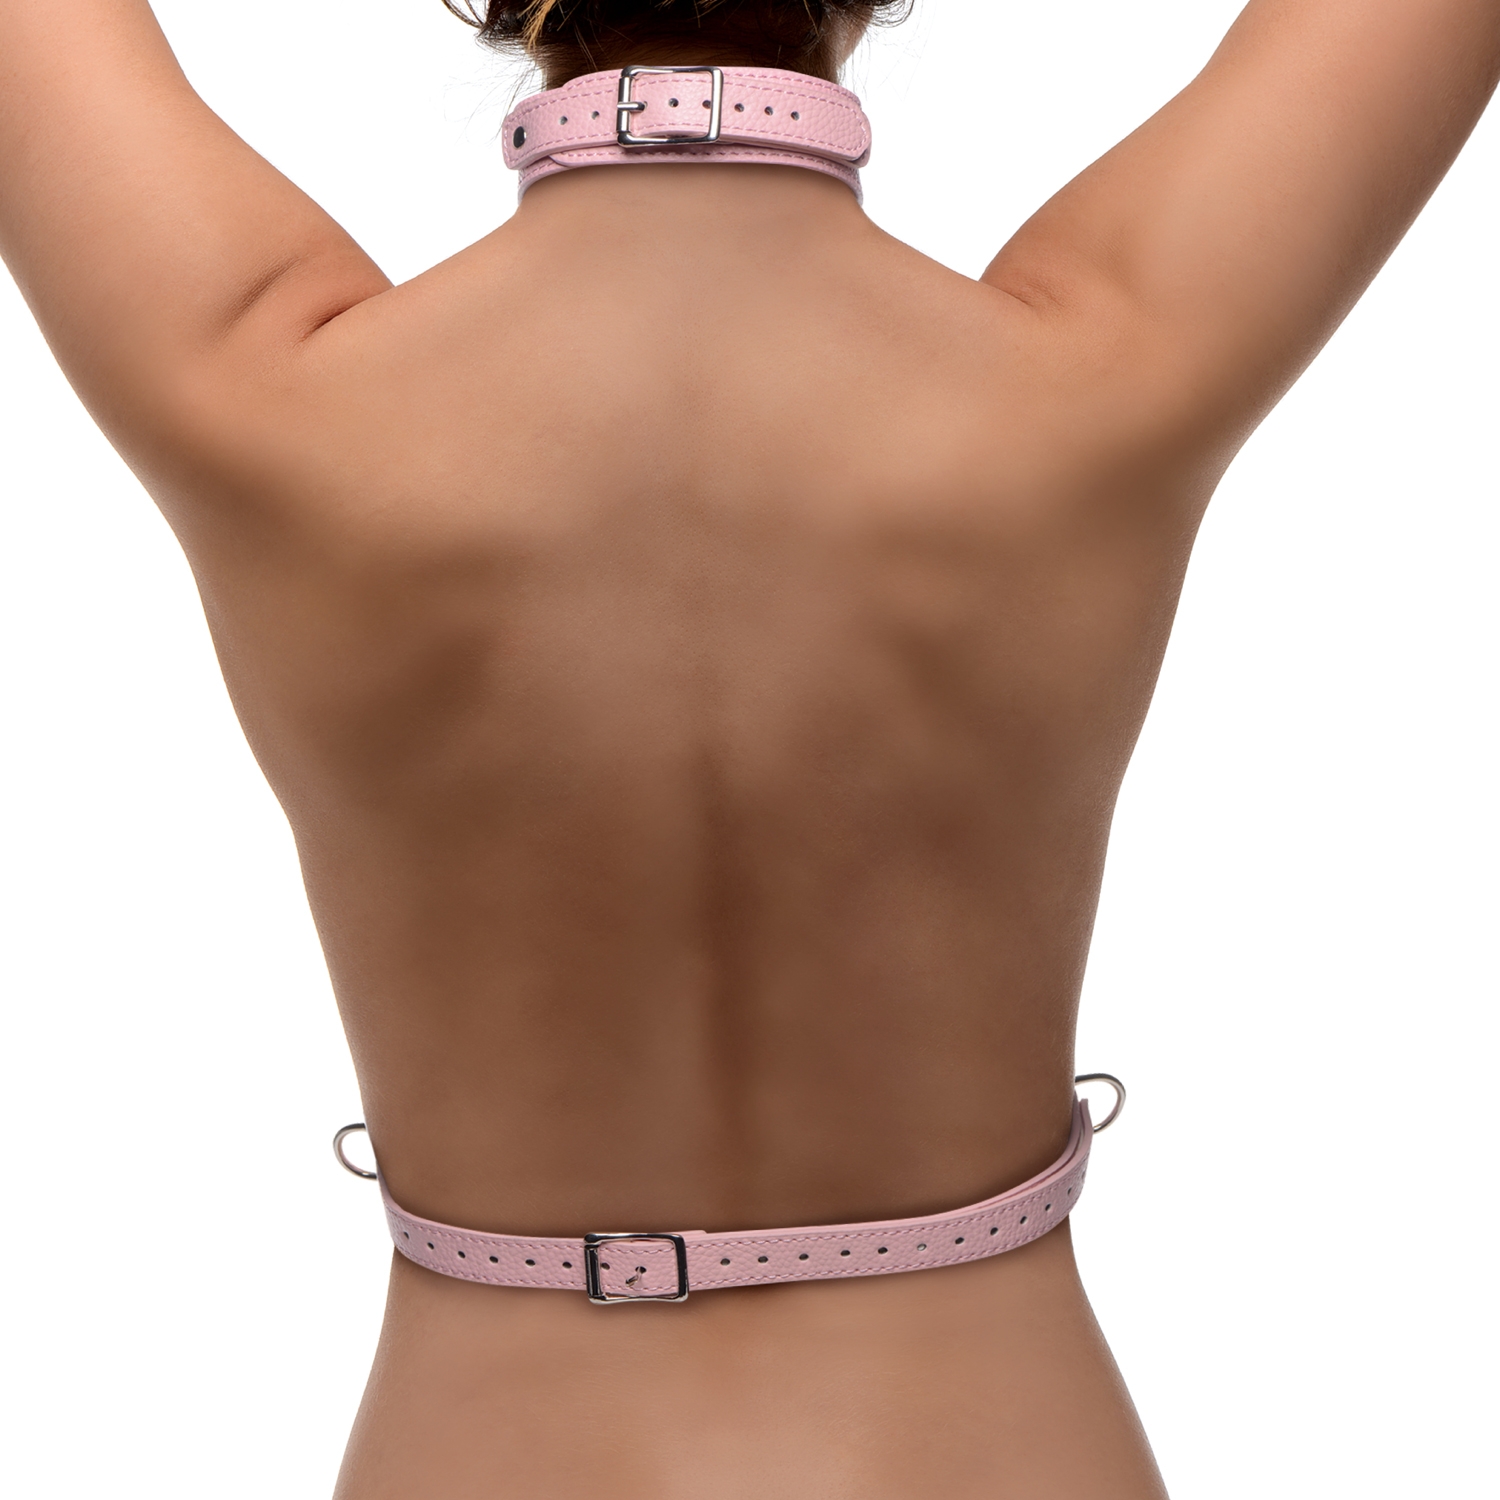 Frisky Miss Behaved Pink Chest Harness - Rosa thumbnail